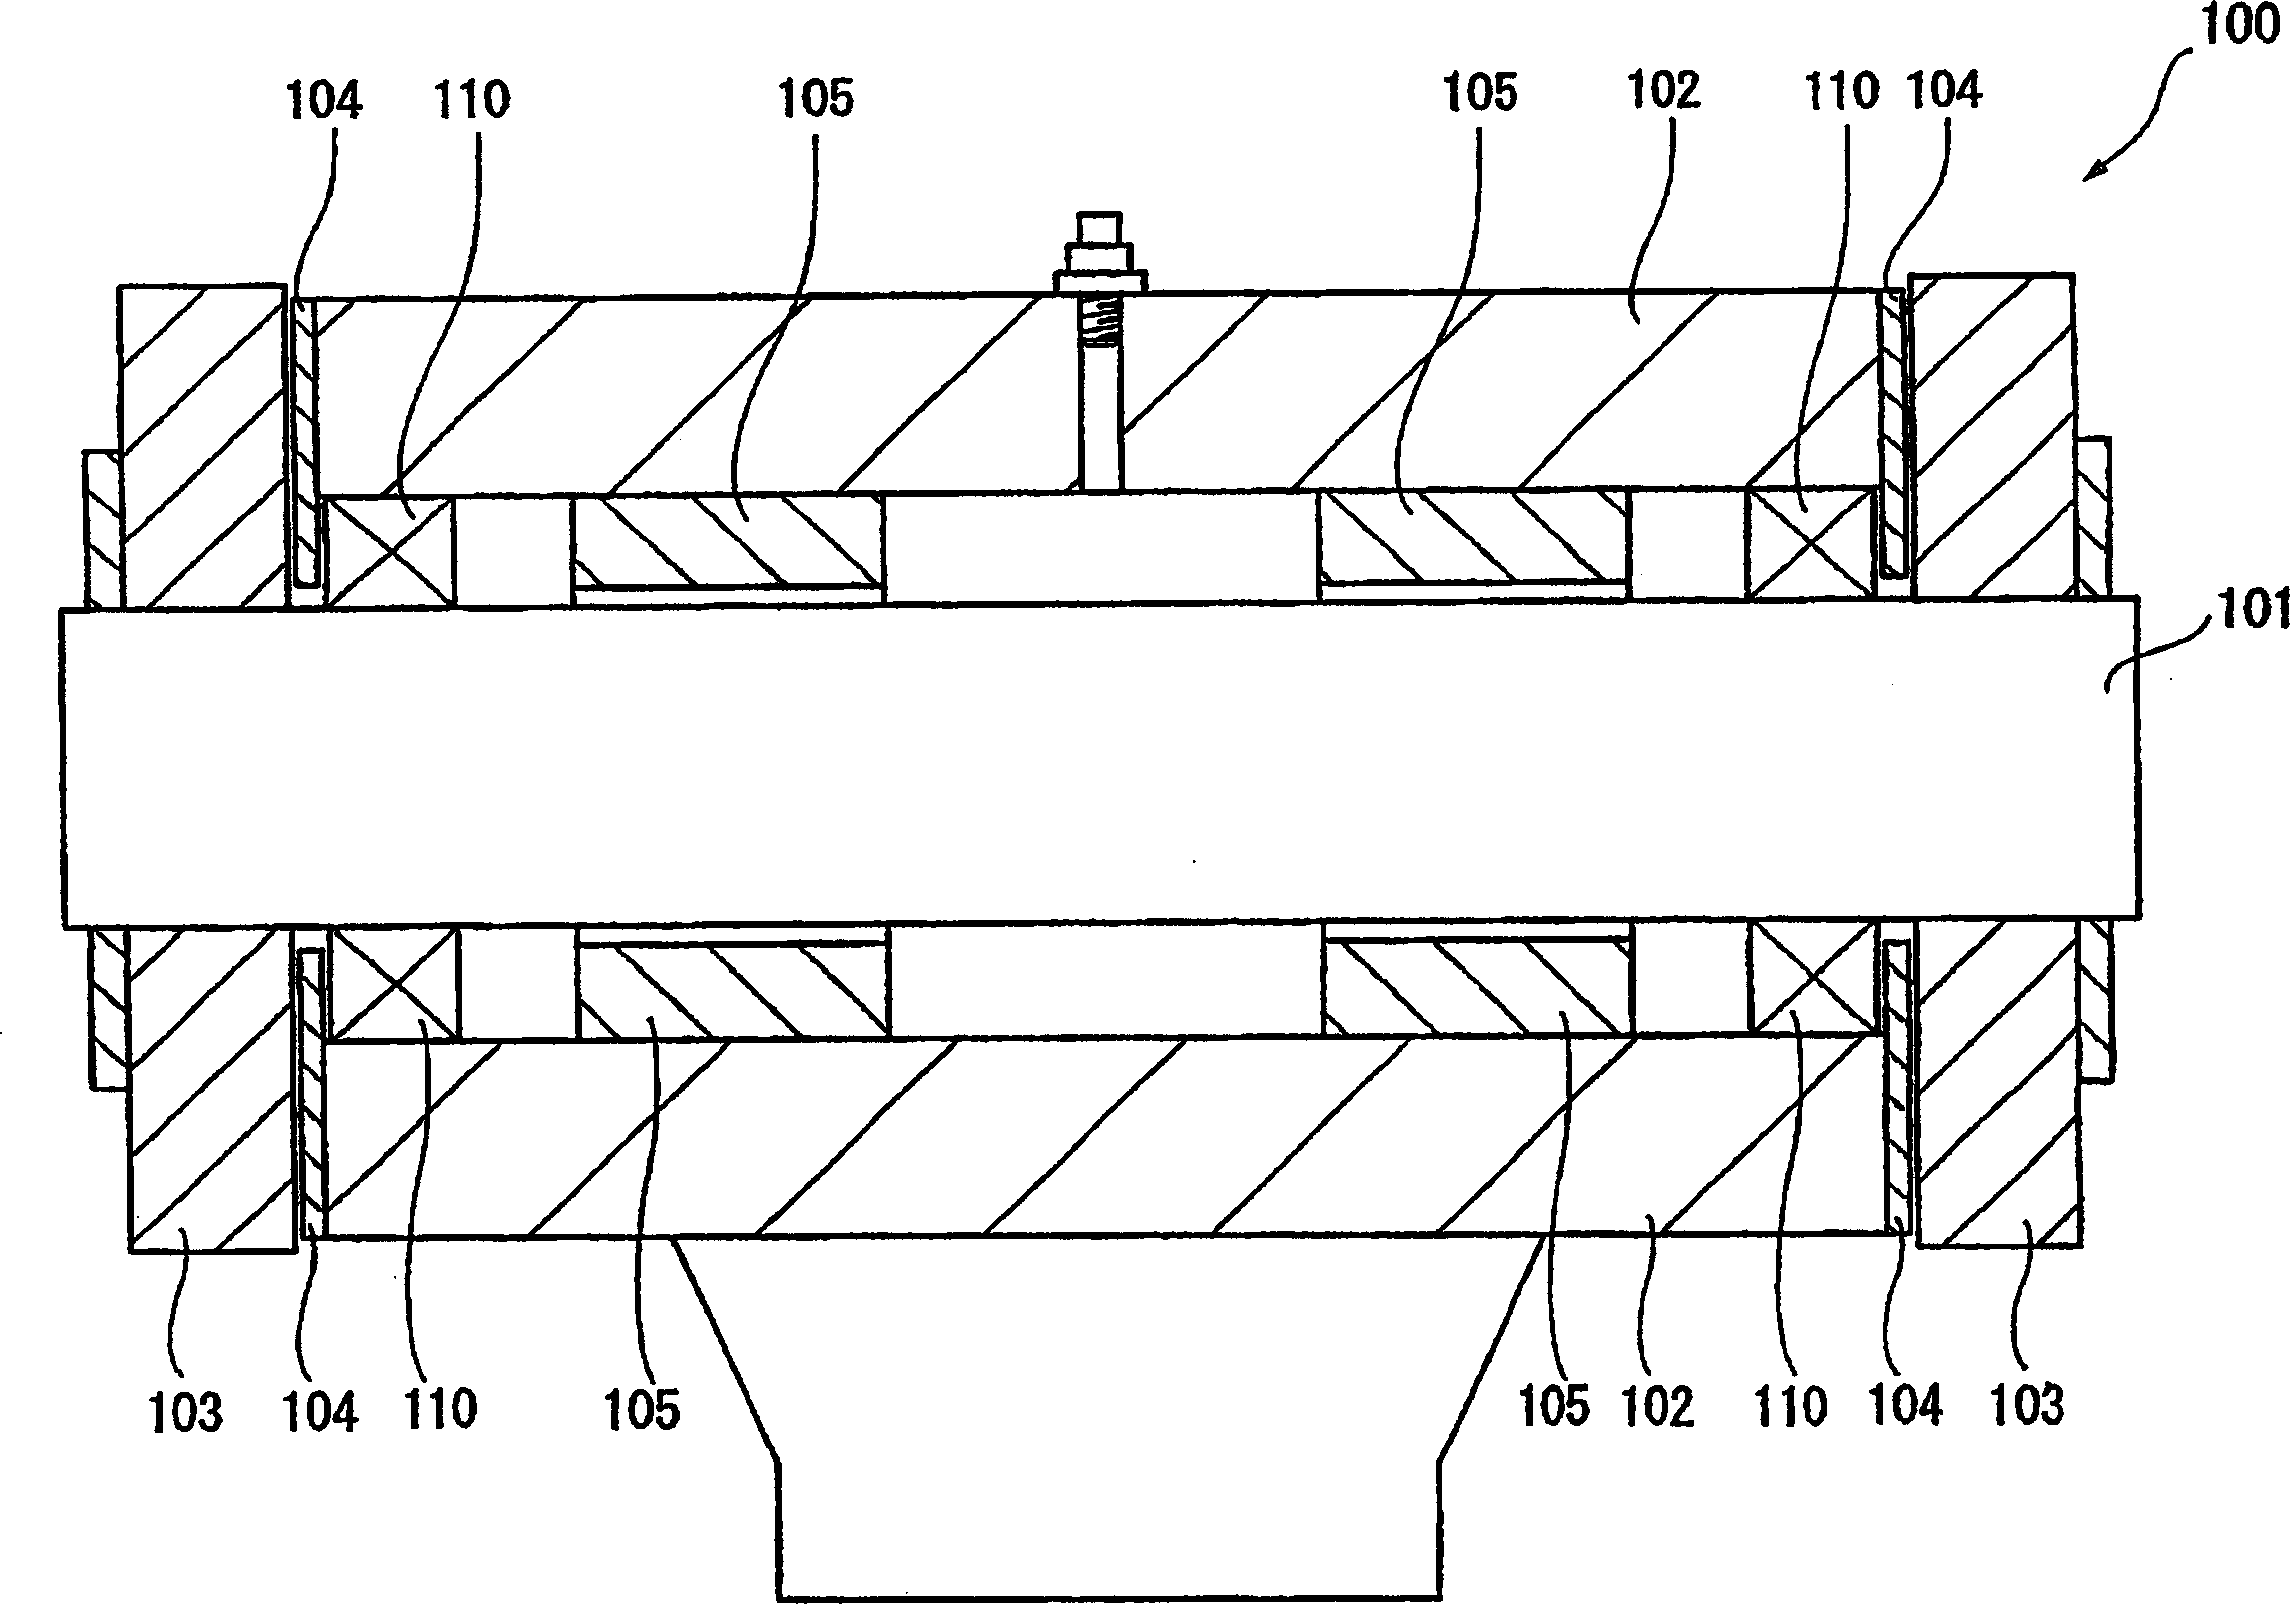 Bearing seal and swing device